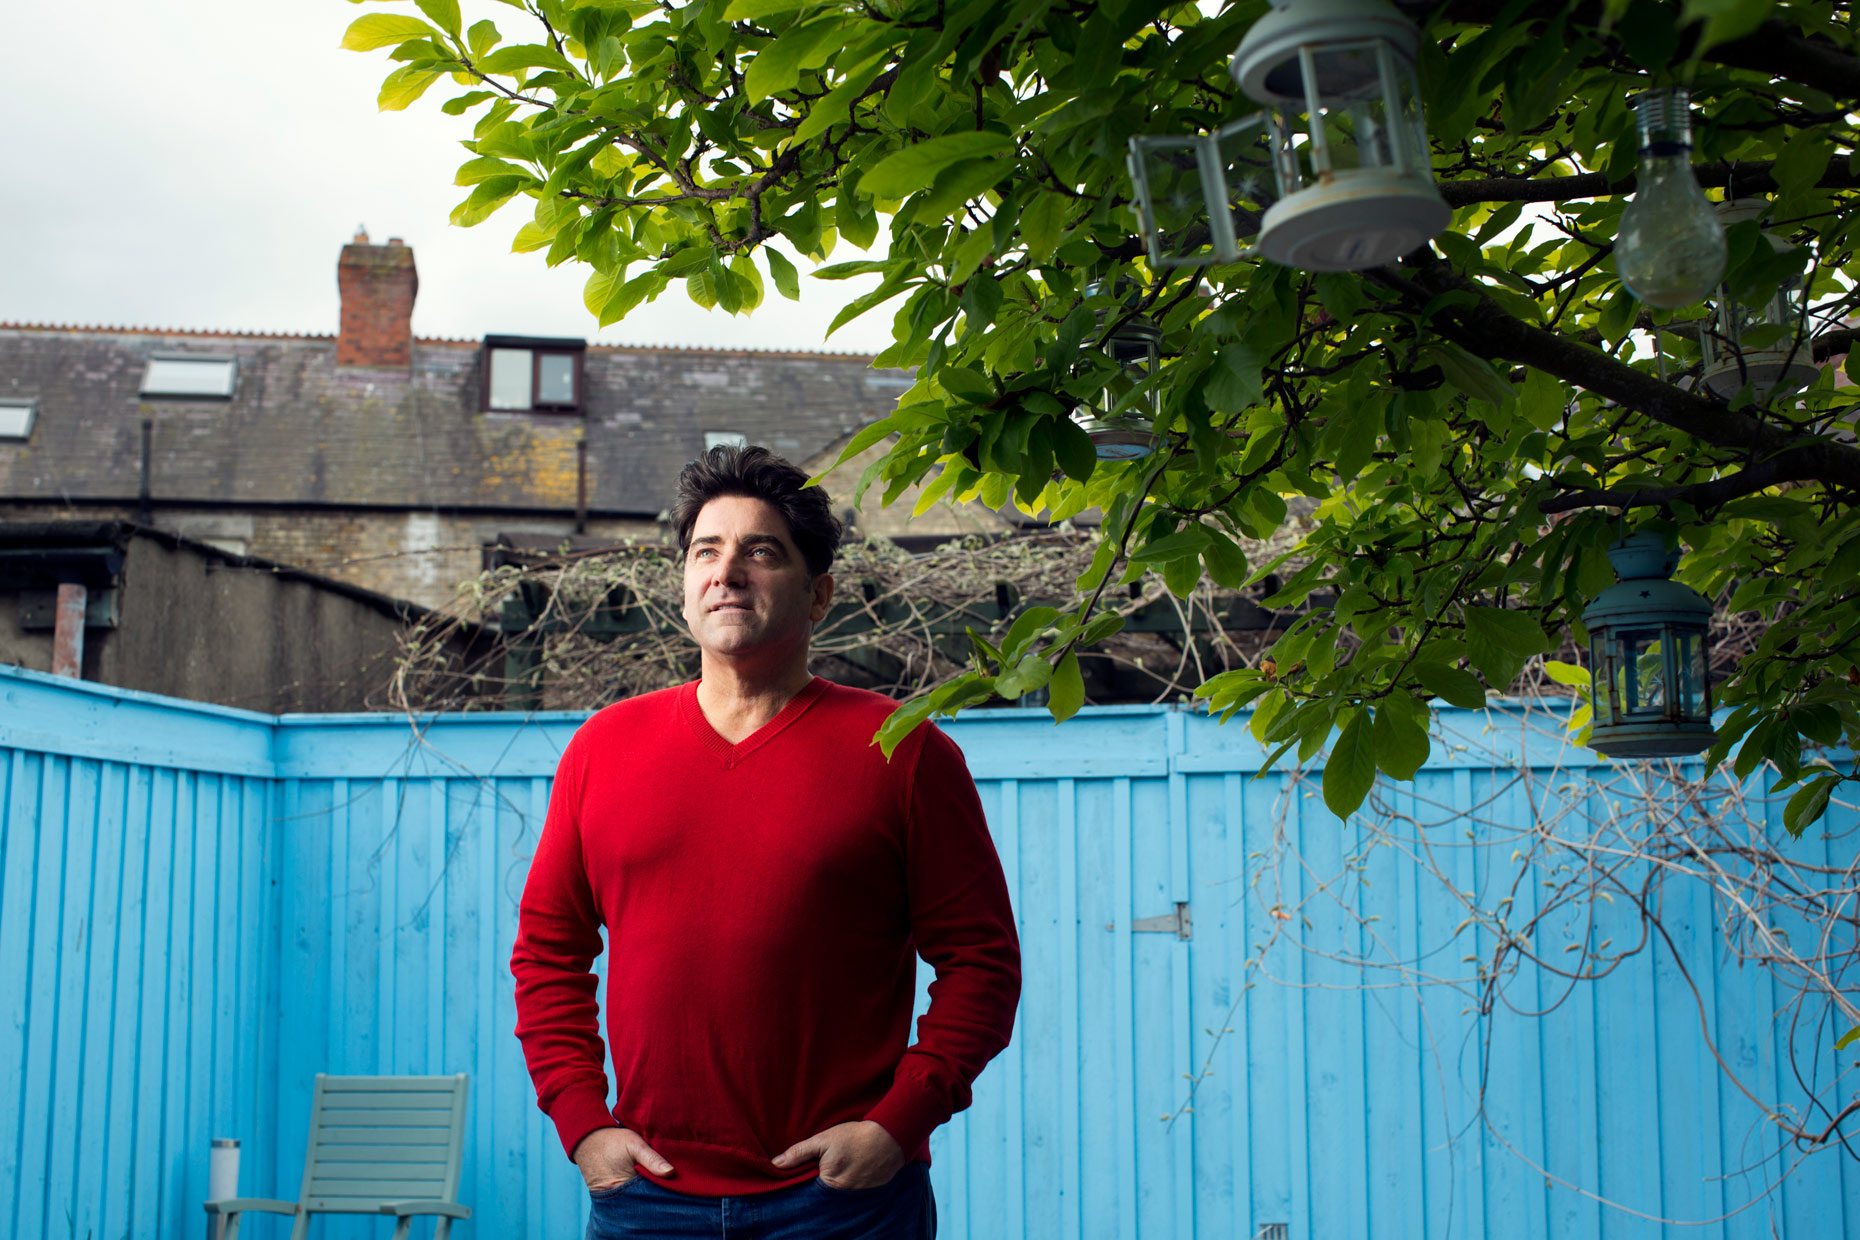 location portrait photography: brian kennedy singer in his backgarden